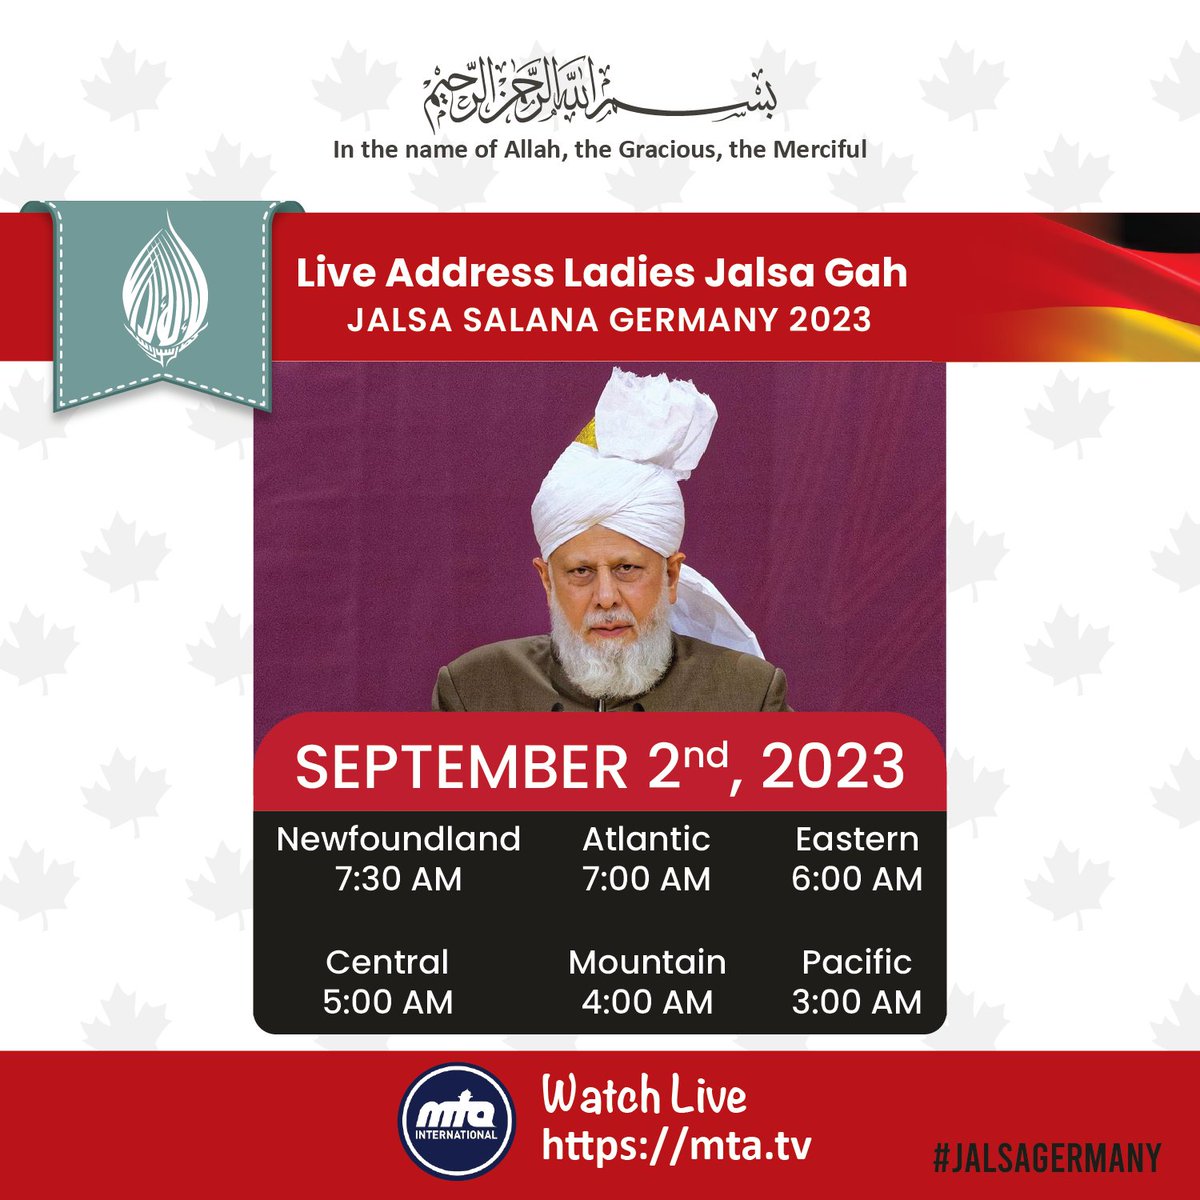 A momentous occasion! His Holiness delivers a live address at the Ladies Jalsa Gah during the historic 100-year Jubilee of the Jama'at Germany. This marks a century of spiritual growth and unity in the German Jama'at. 🇩🇪🕌 #JalsaGermany